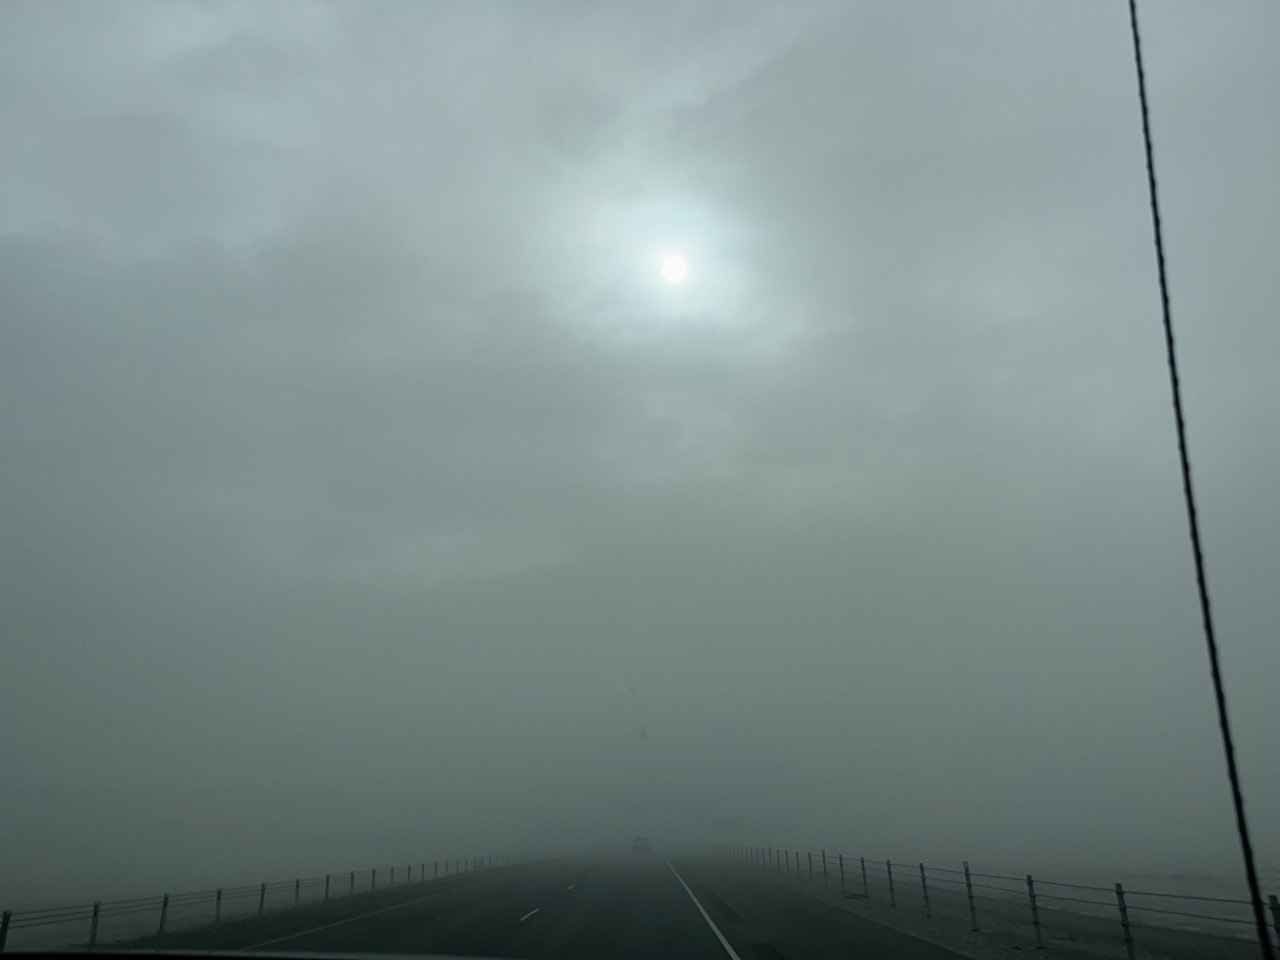 While crossing Nevada there was so much wind that salt blown in the air made it look like fog